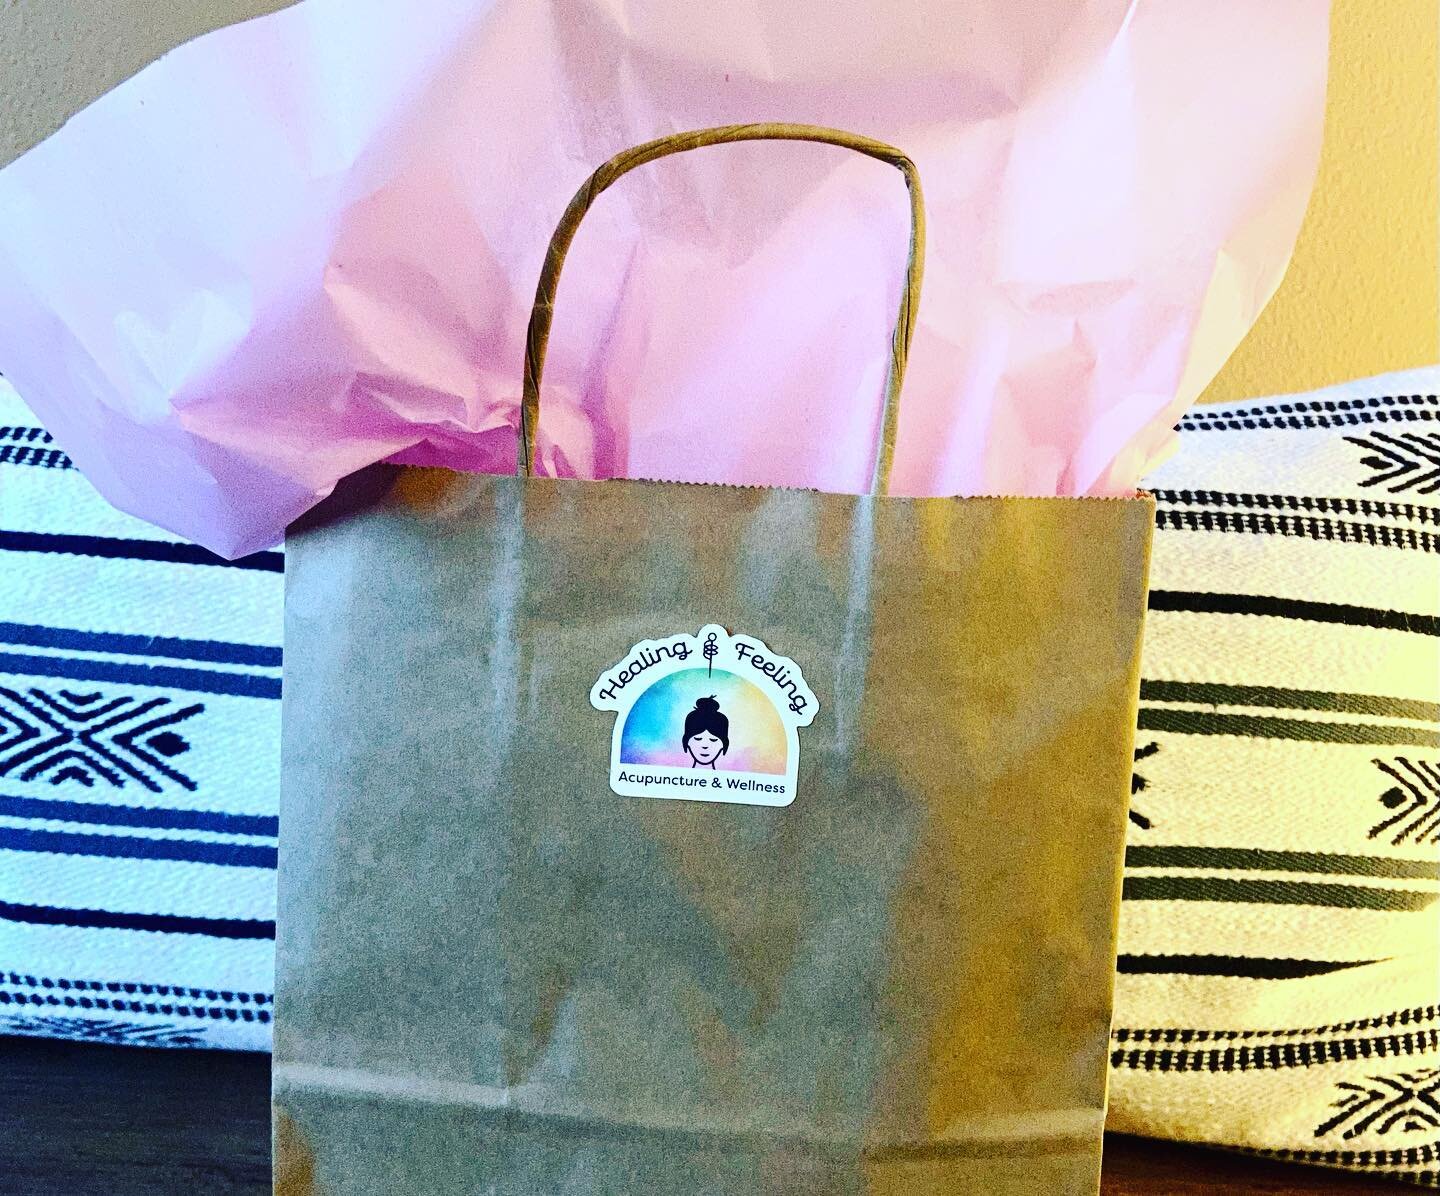 Postpartum goody bags were a hit! Helping moms and babies stay calm and nourished! 🥰💕#fremontseattle #ballardseattle #pregnancyacupuncture #seattlemom #seattlefertility #acupuncturerocks